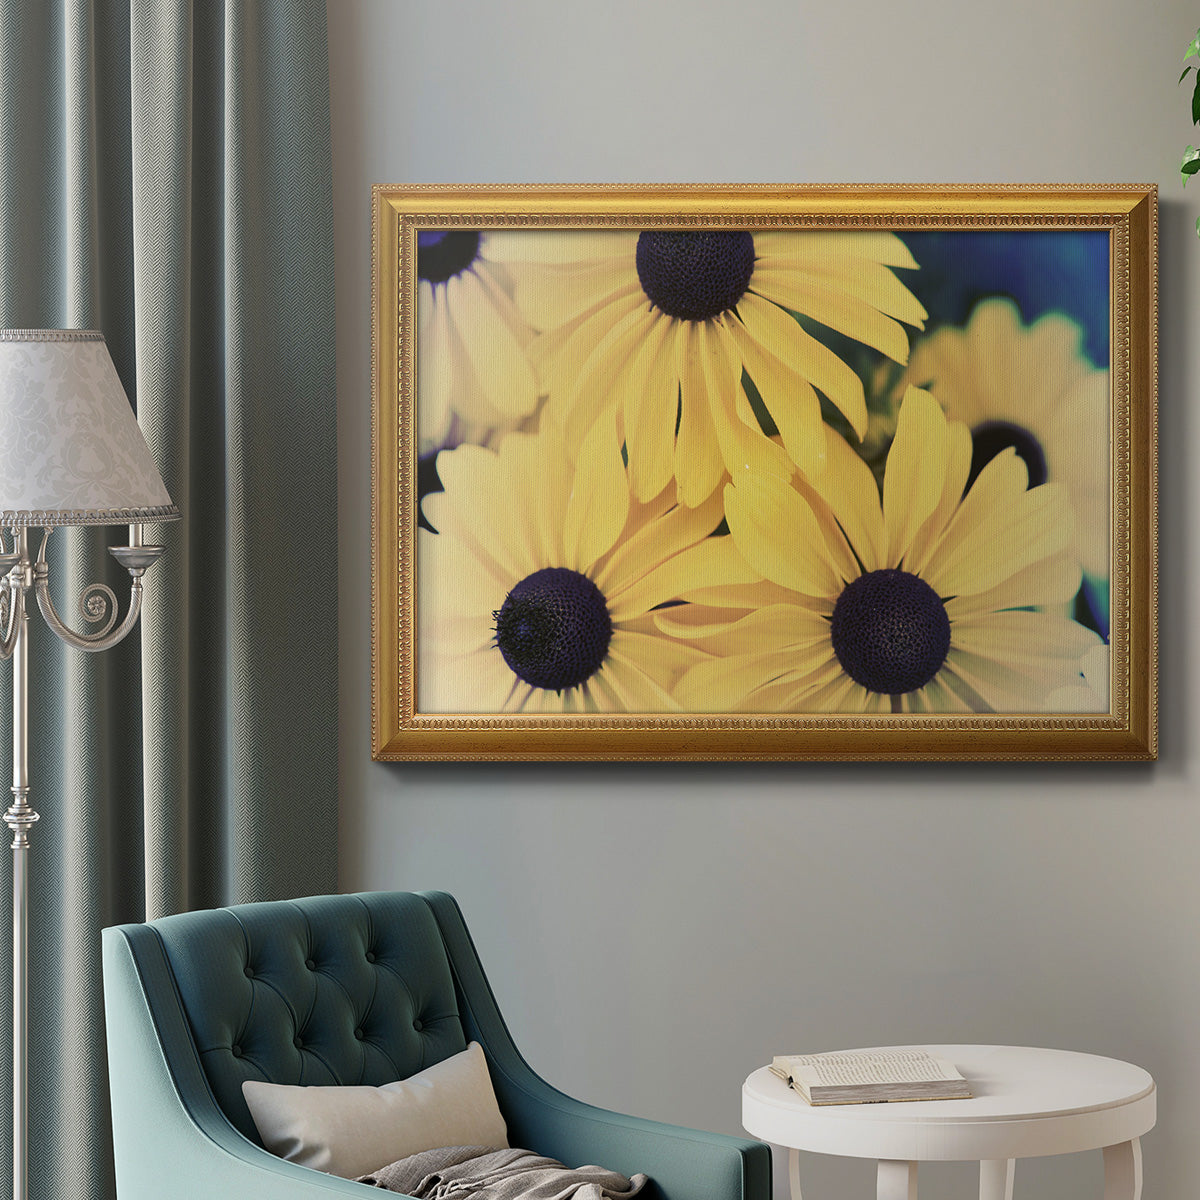 Susans II Premium Framed Canvas- Ready to Hang